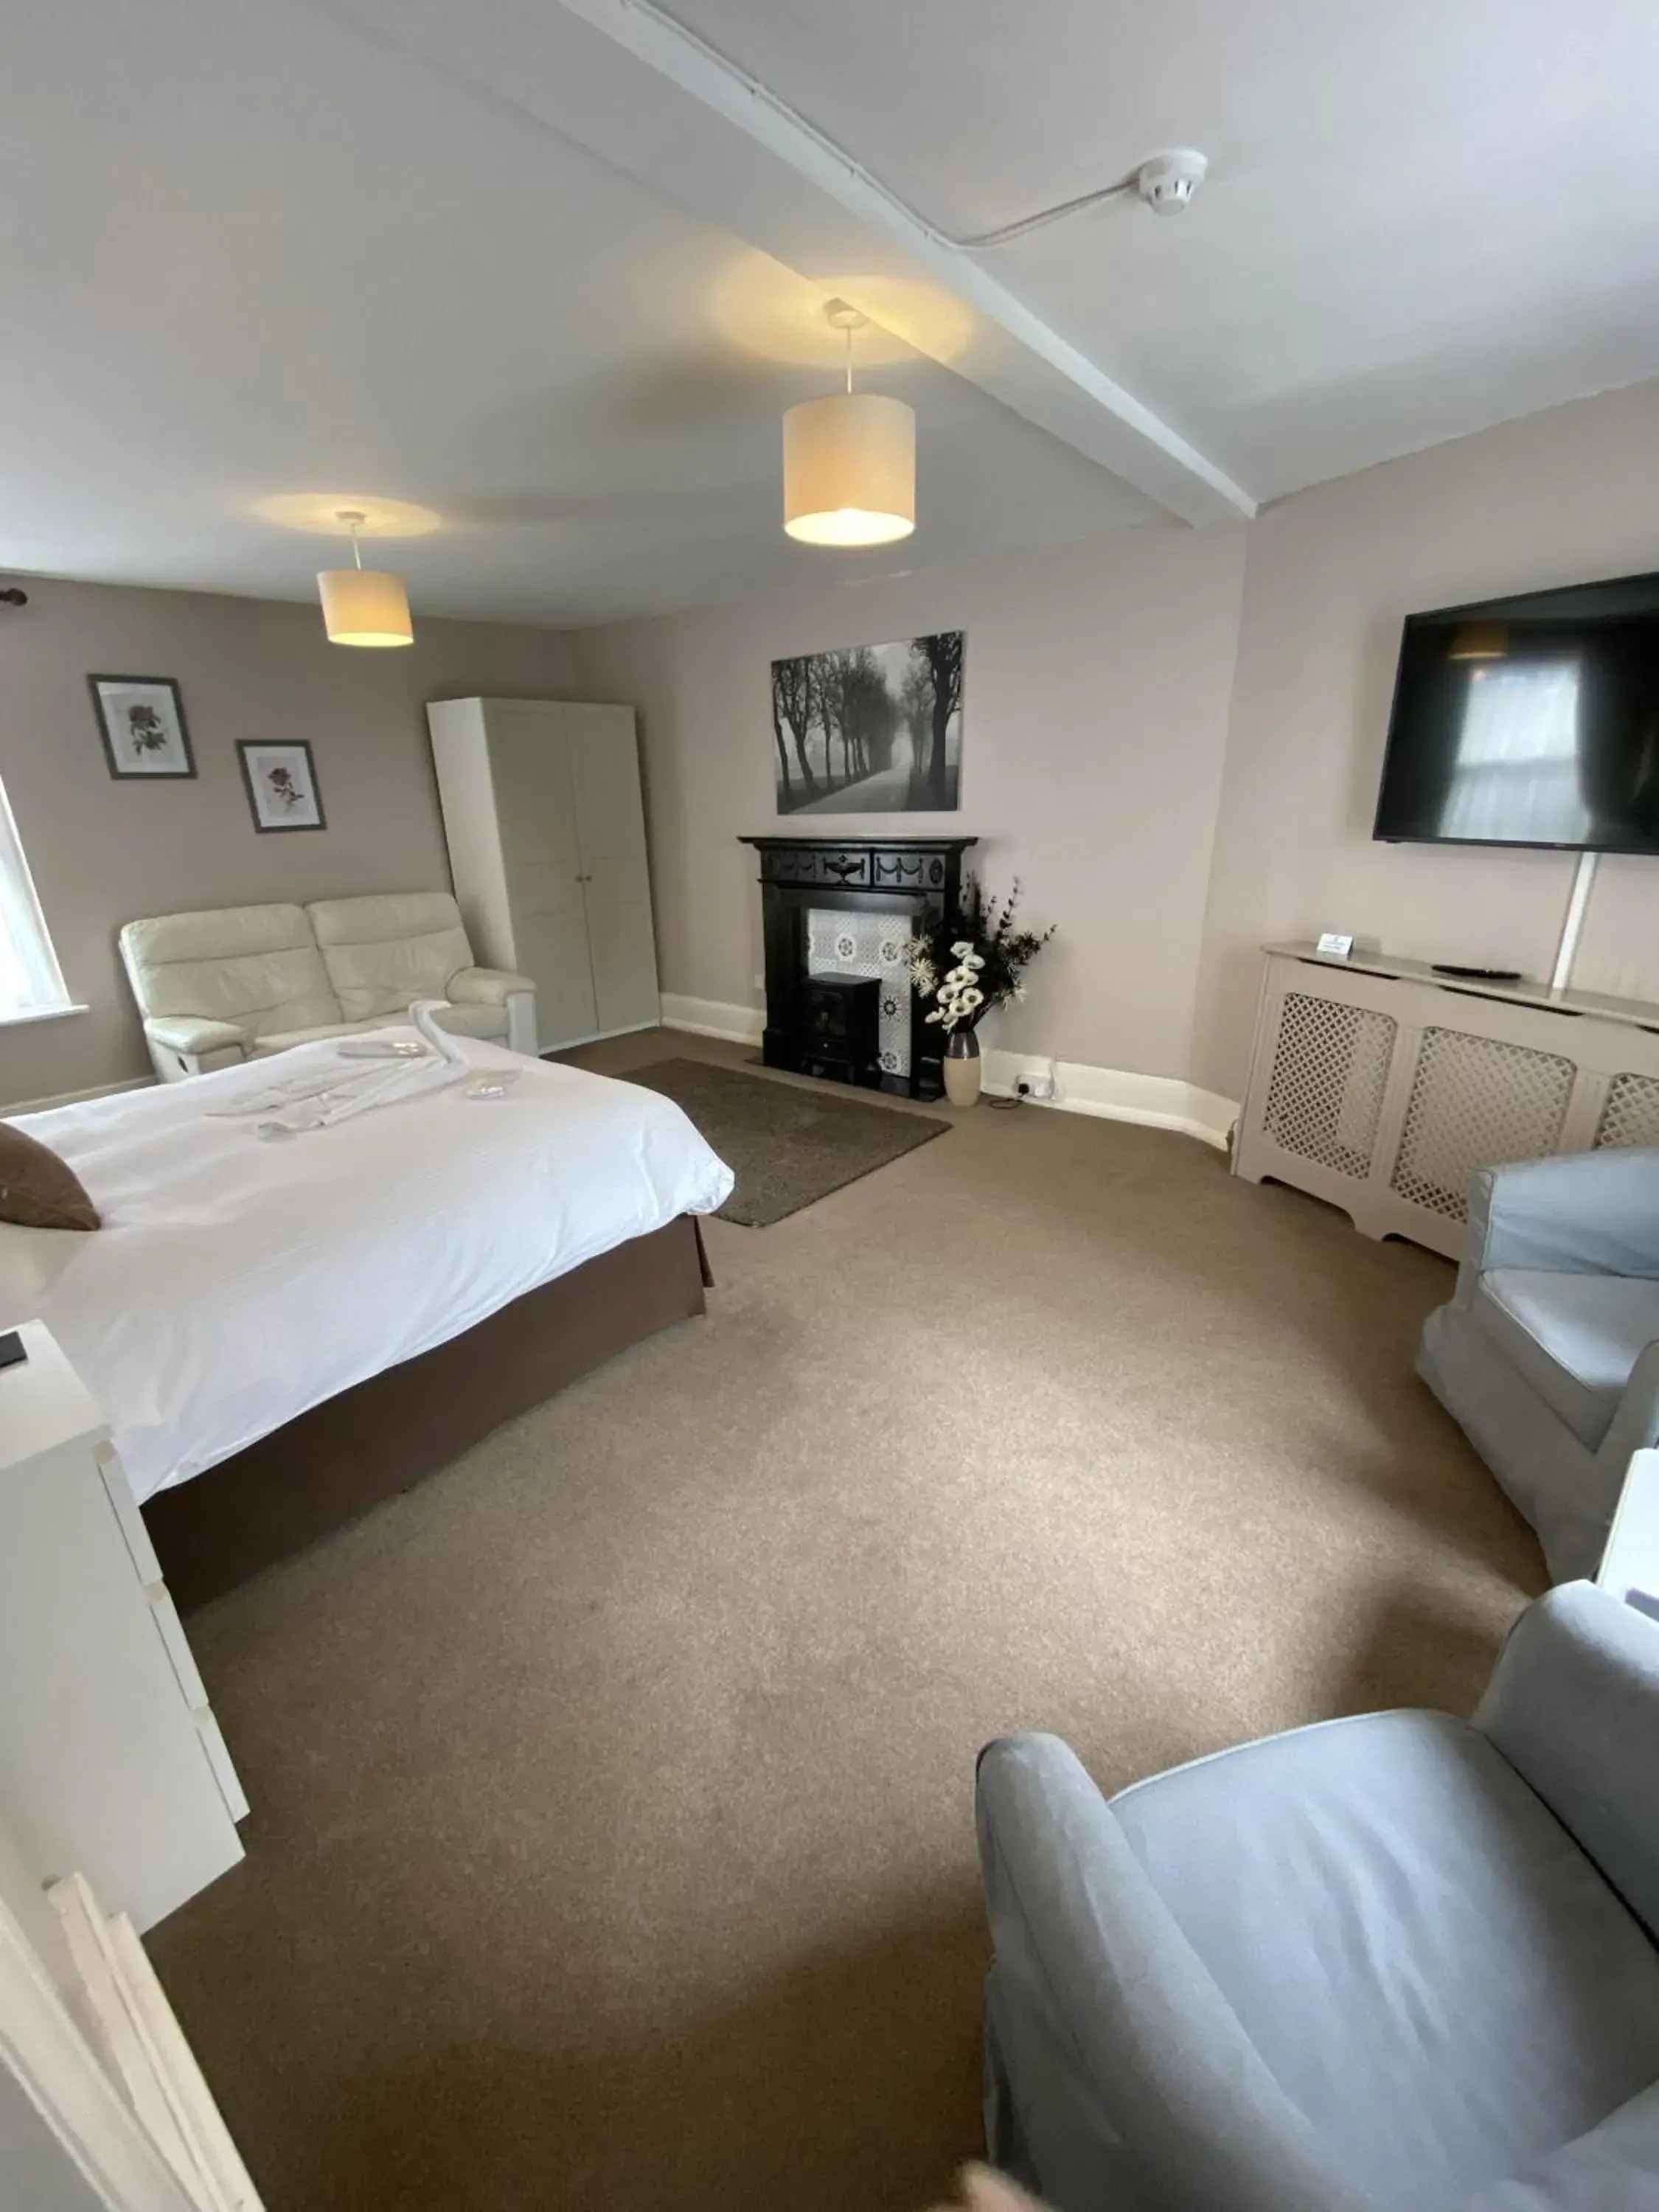 Superior King Room - single occupancy in The Swan Hotel